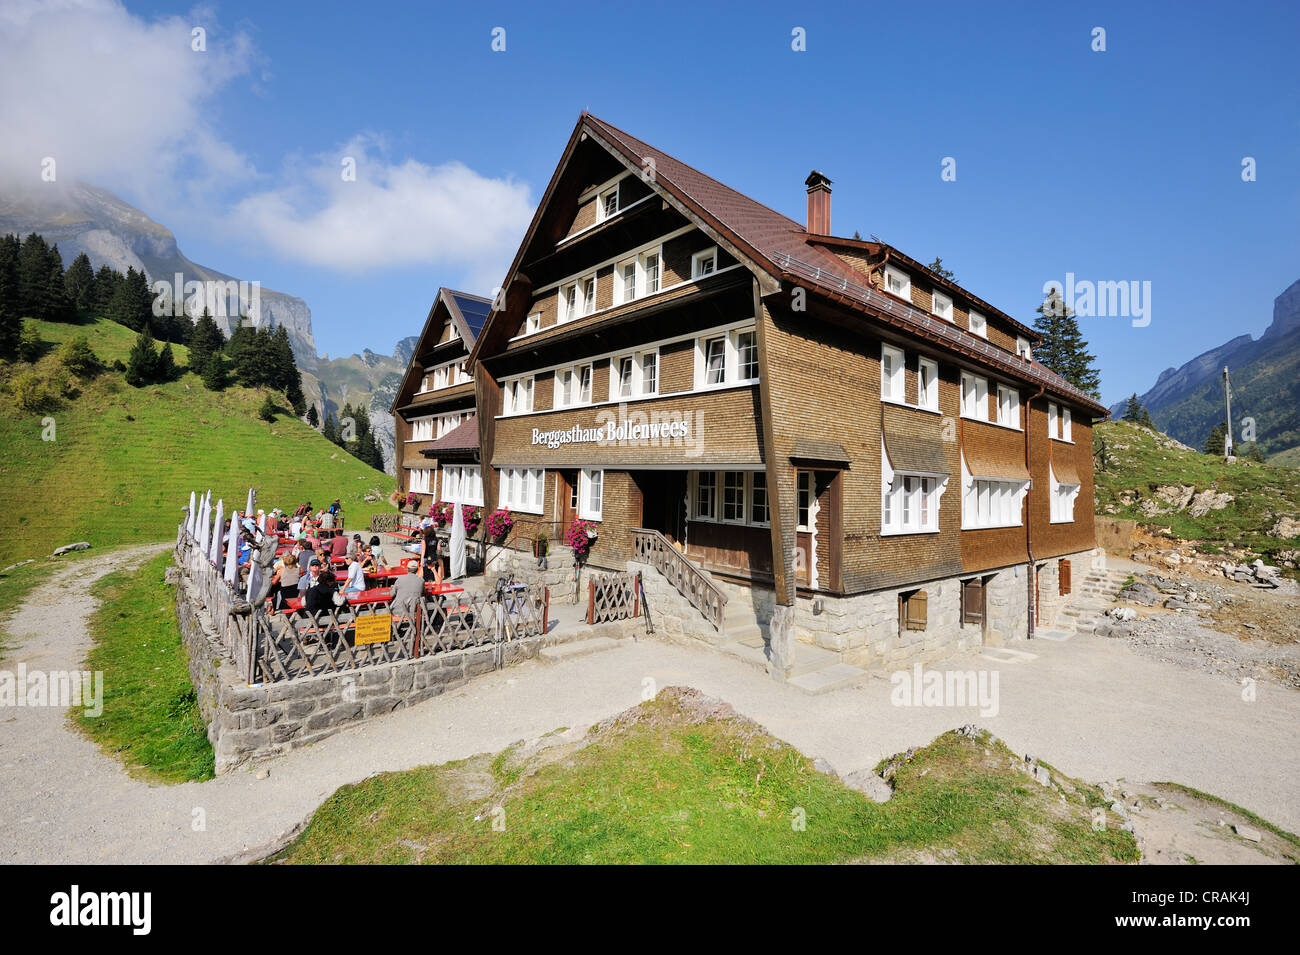 Berggasthaus Bollenwees, 1471 m, a mountain guest house above Faelensee Lake in the Appenzell Alps Stock Photo